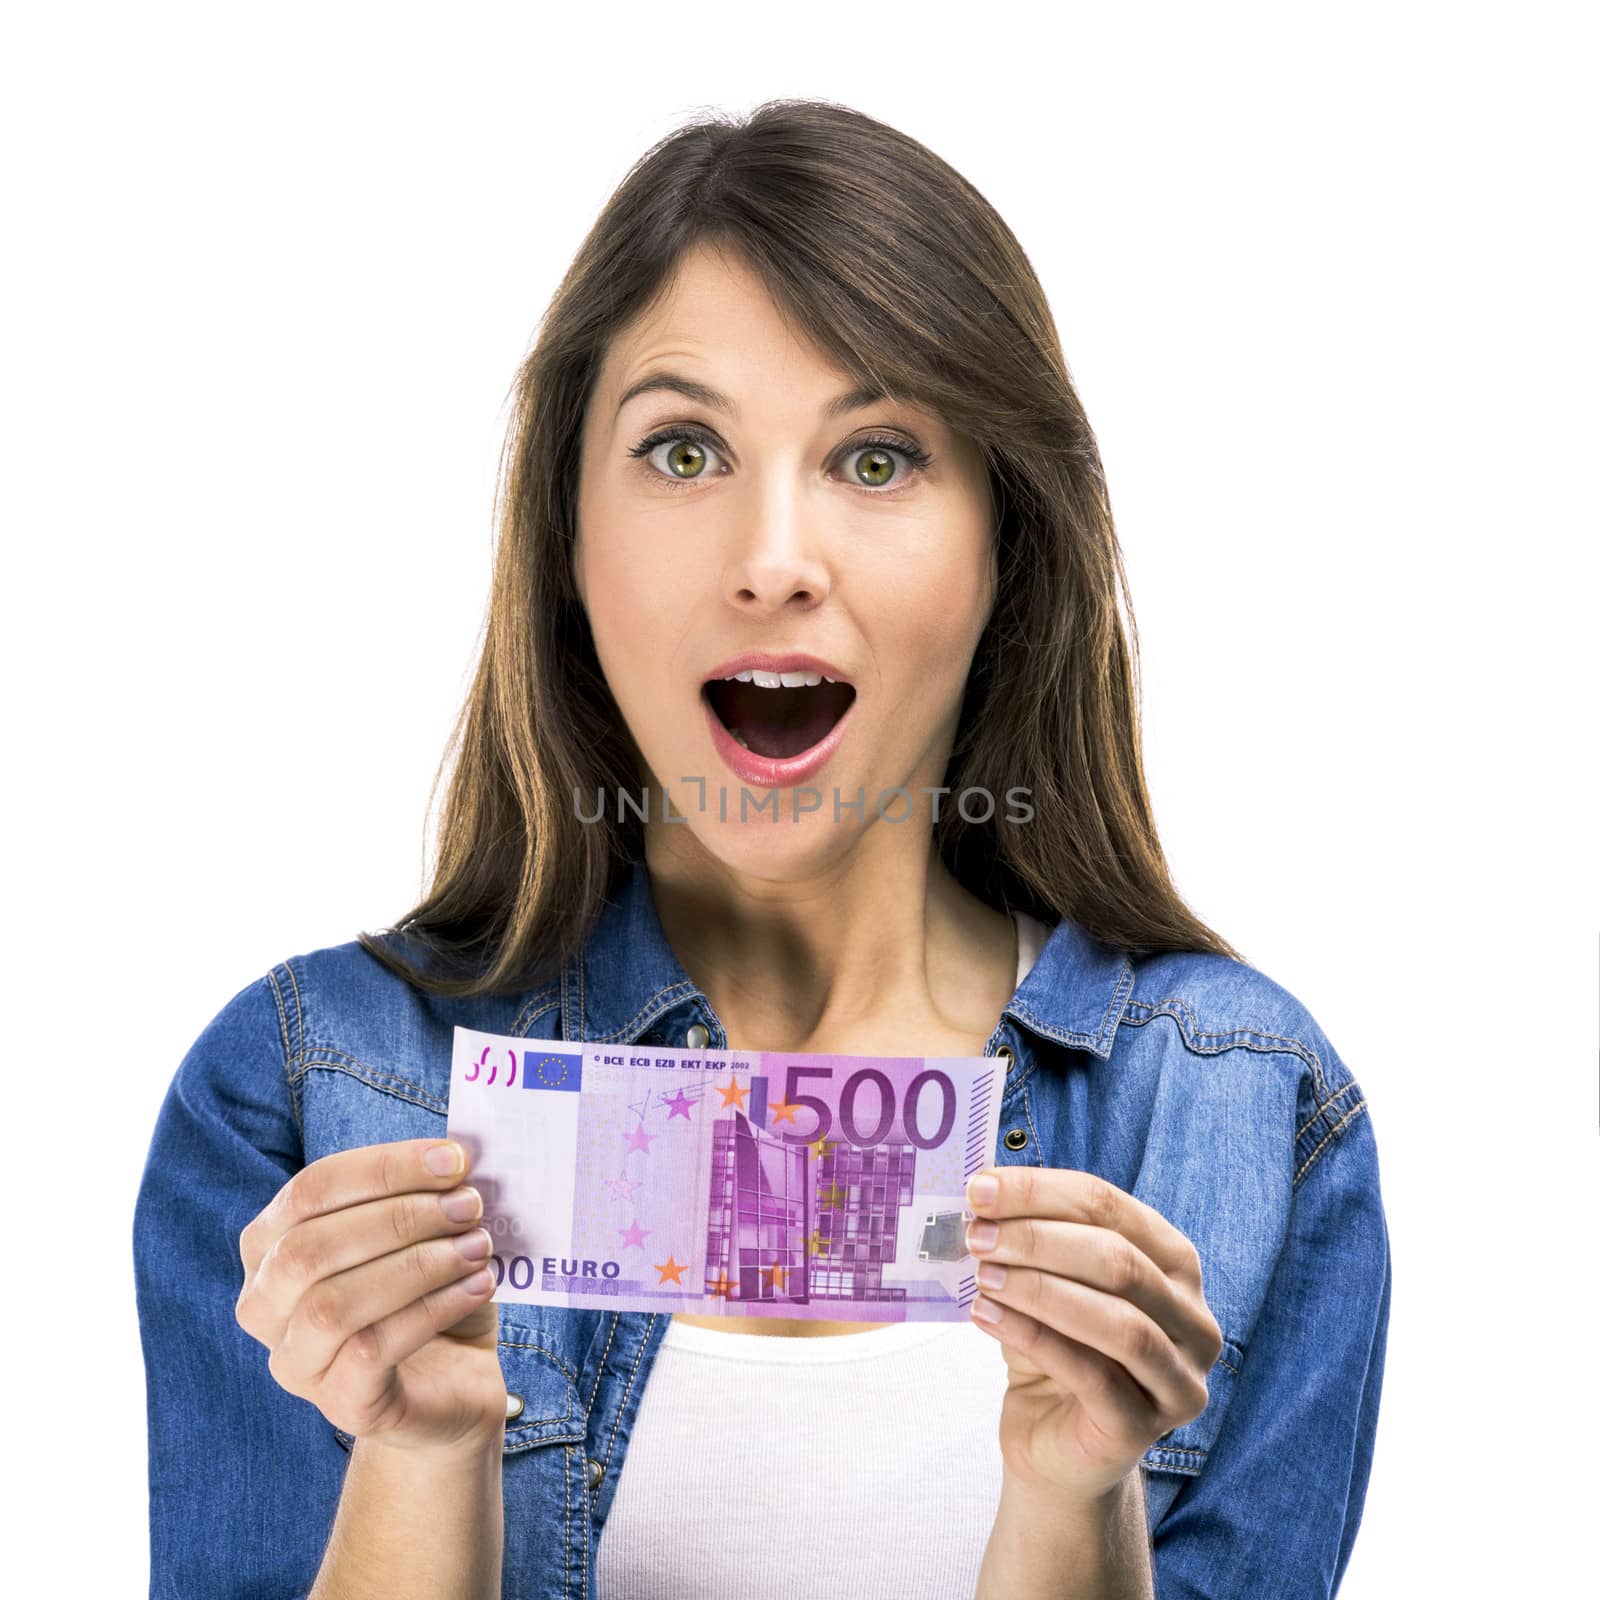 Woman holding some Euro currency notes by Iko